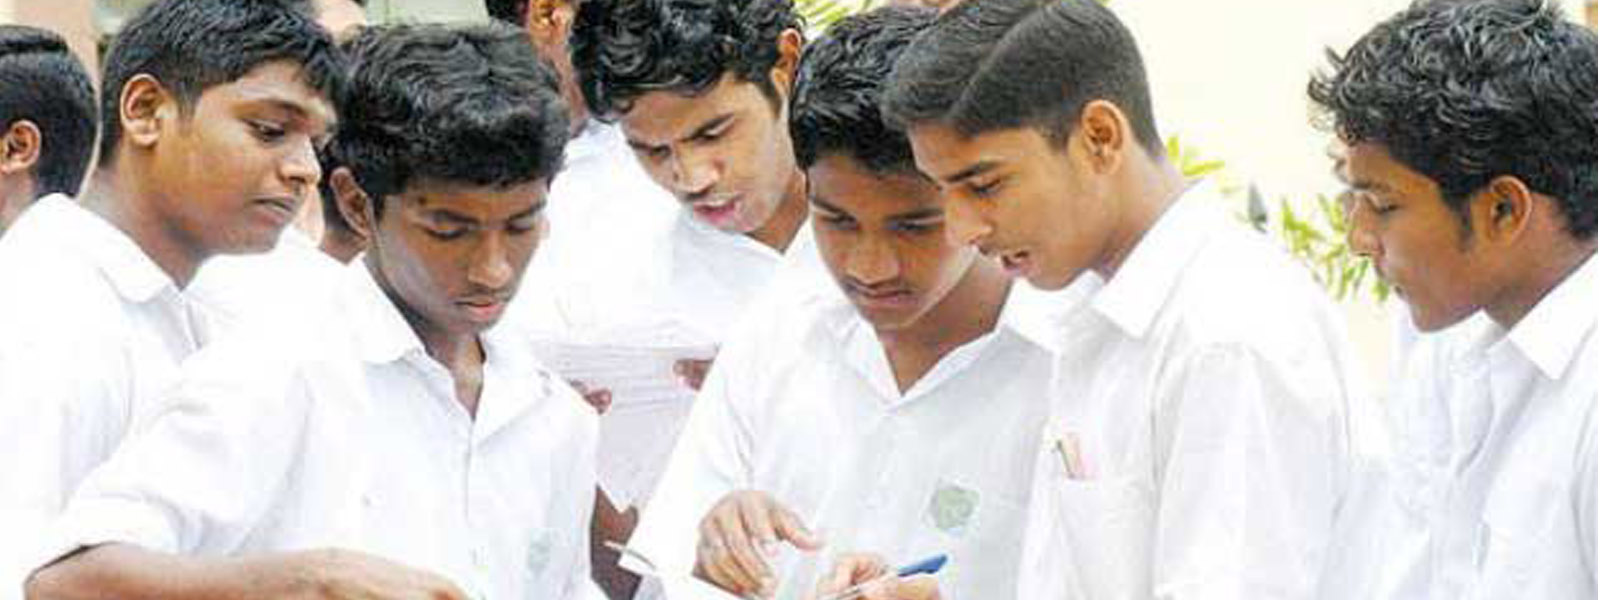 GCE O/L practical exams to commence shortly